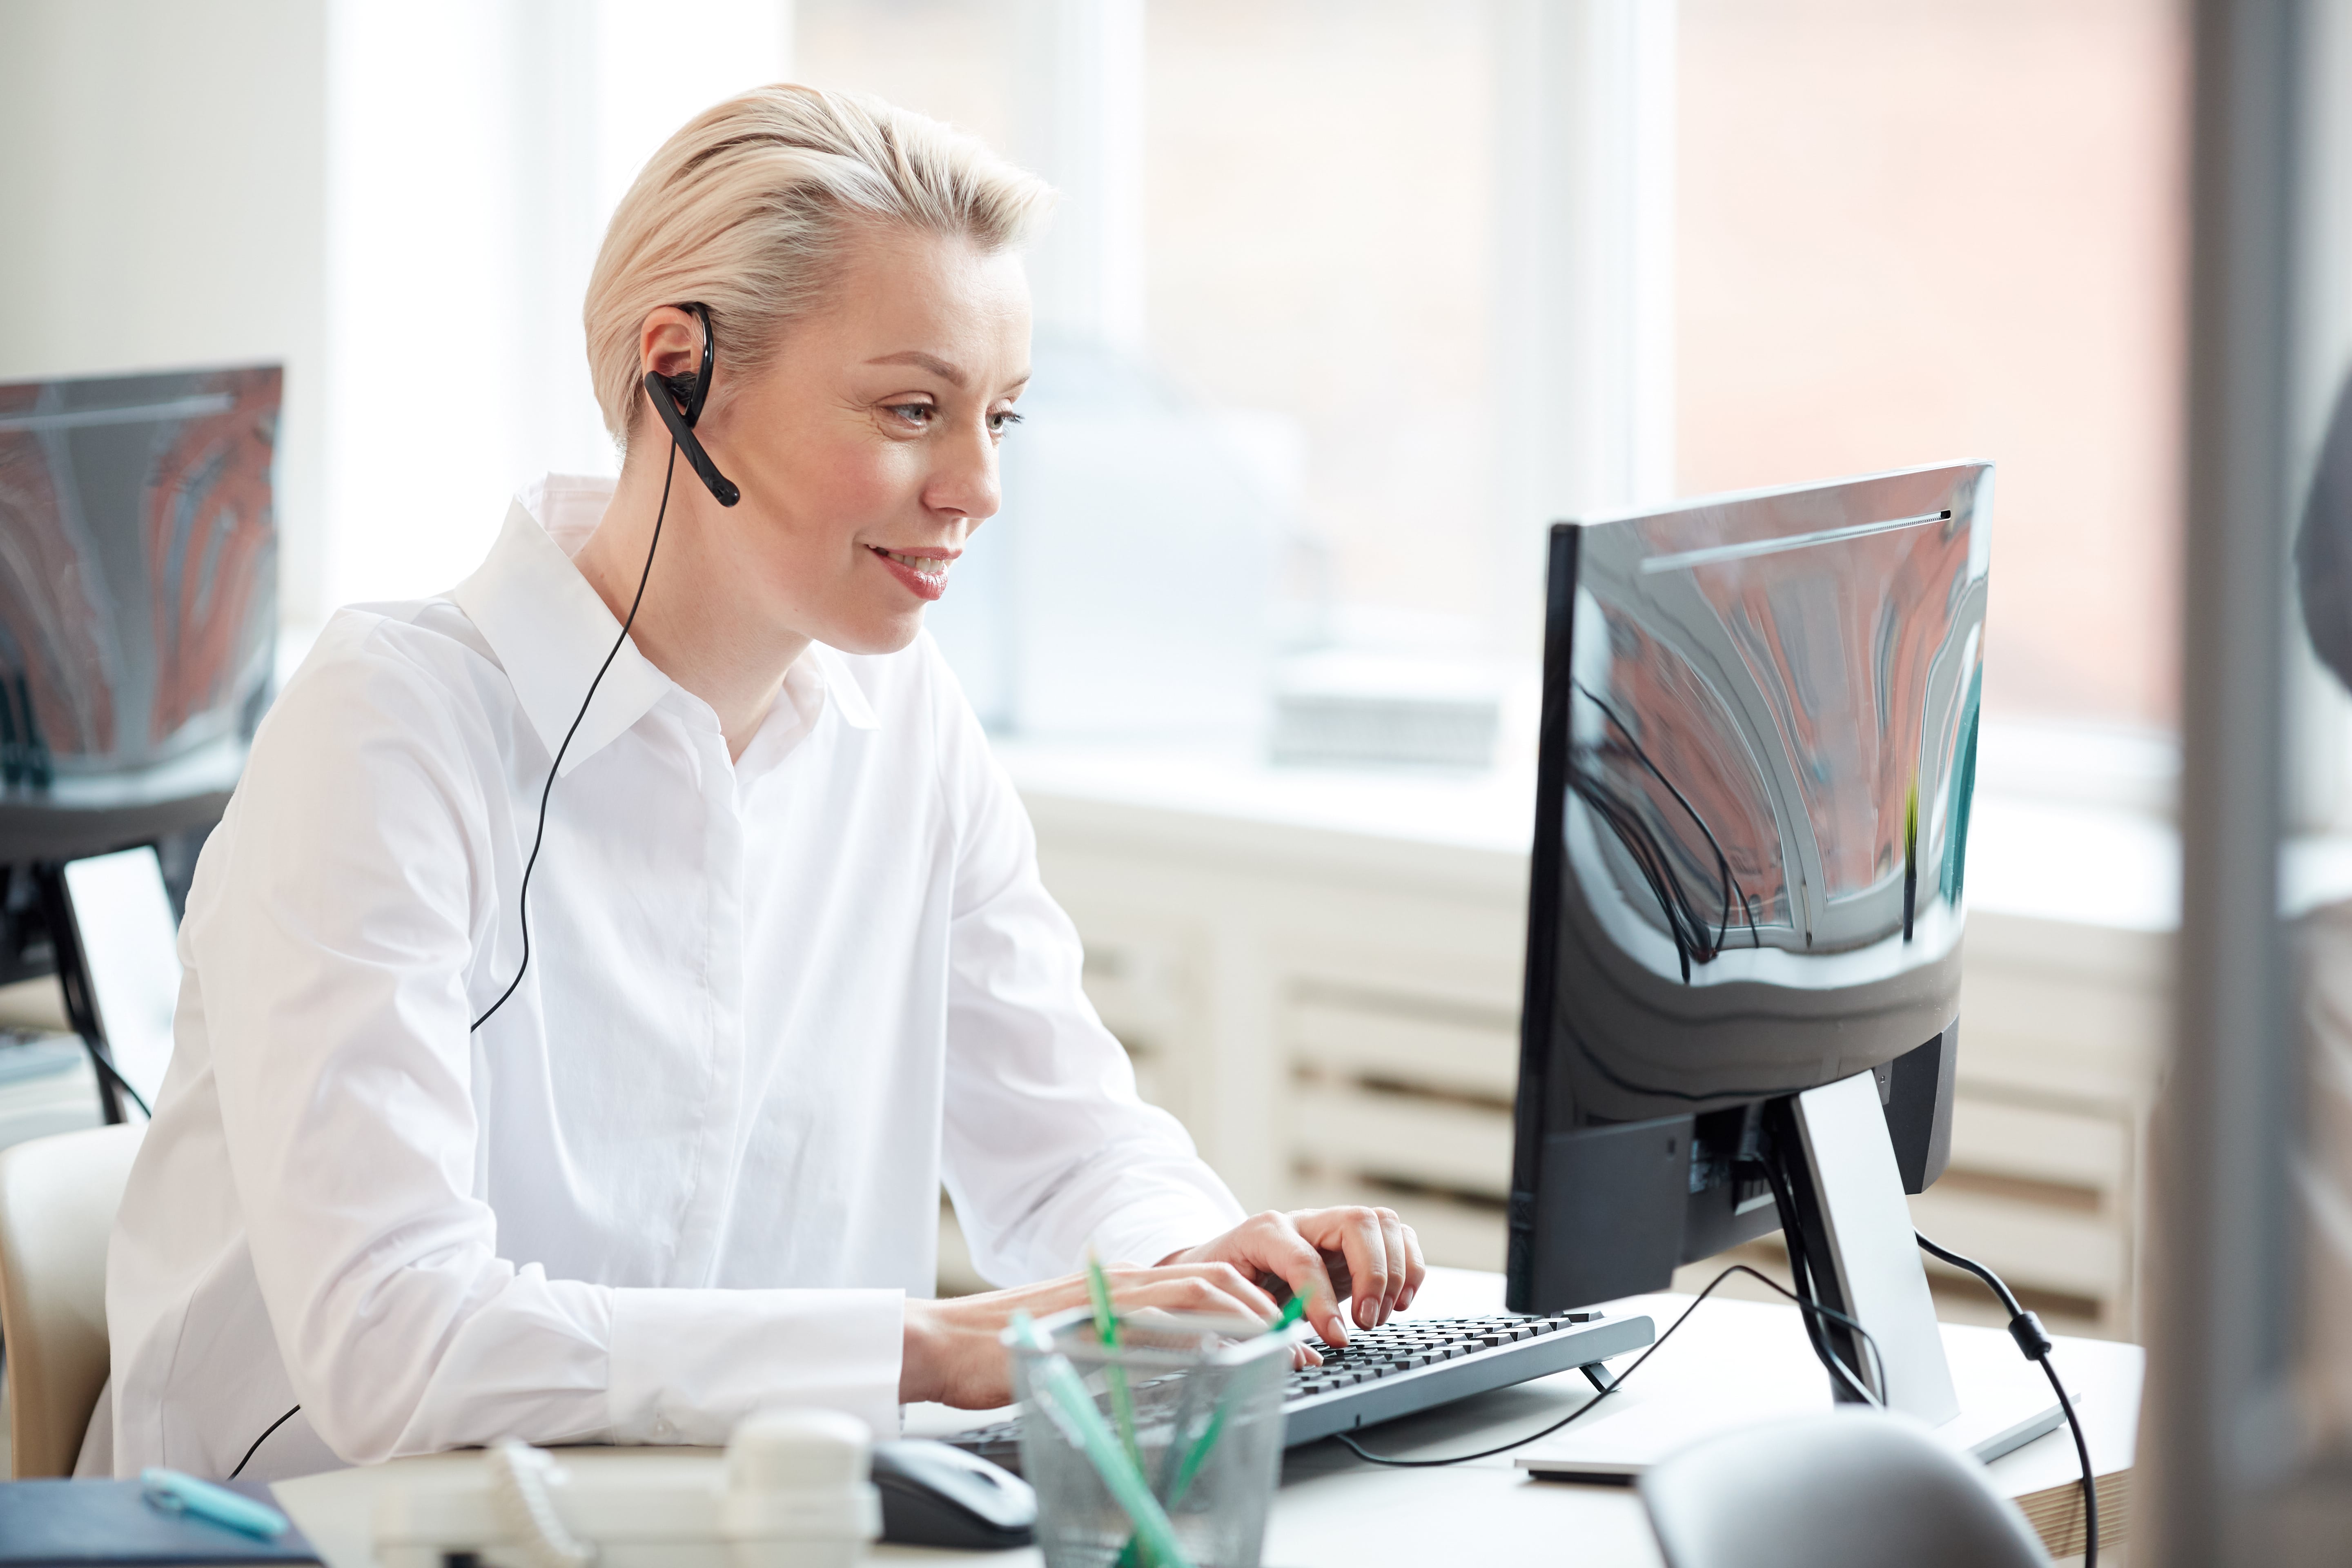 Your guide to radiology call centers (and how they can help)